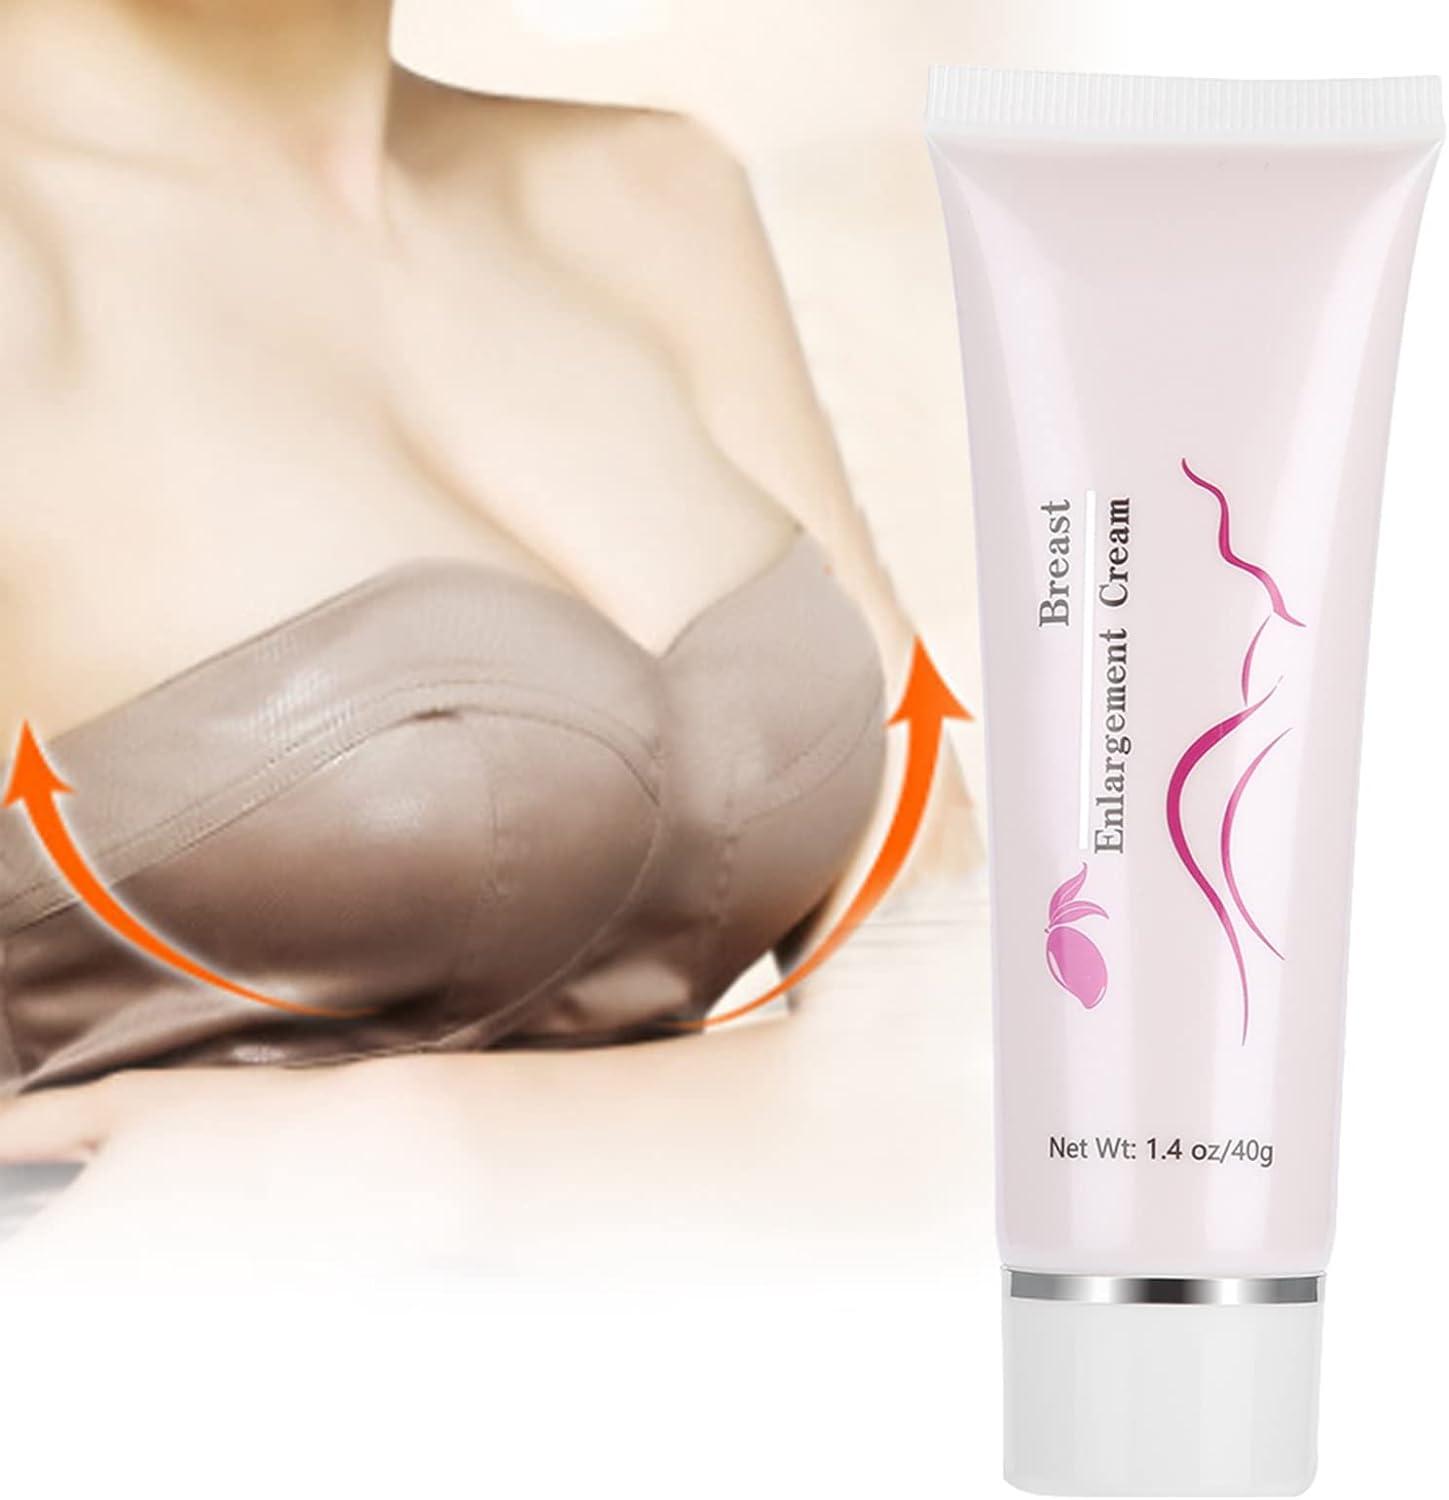 Breast Enhancement Cream 40g Breast Care Firming Lifting Breast Quick  Growth Cream For Fuller Firmer